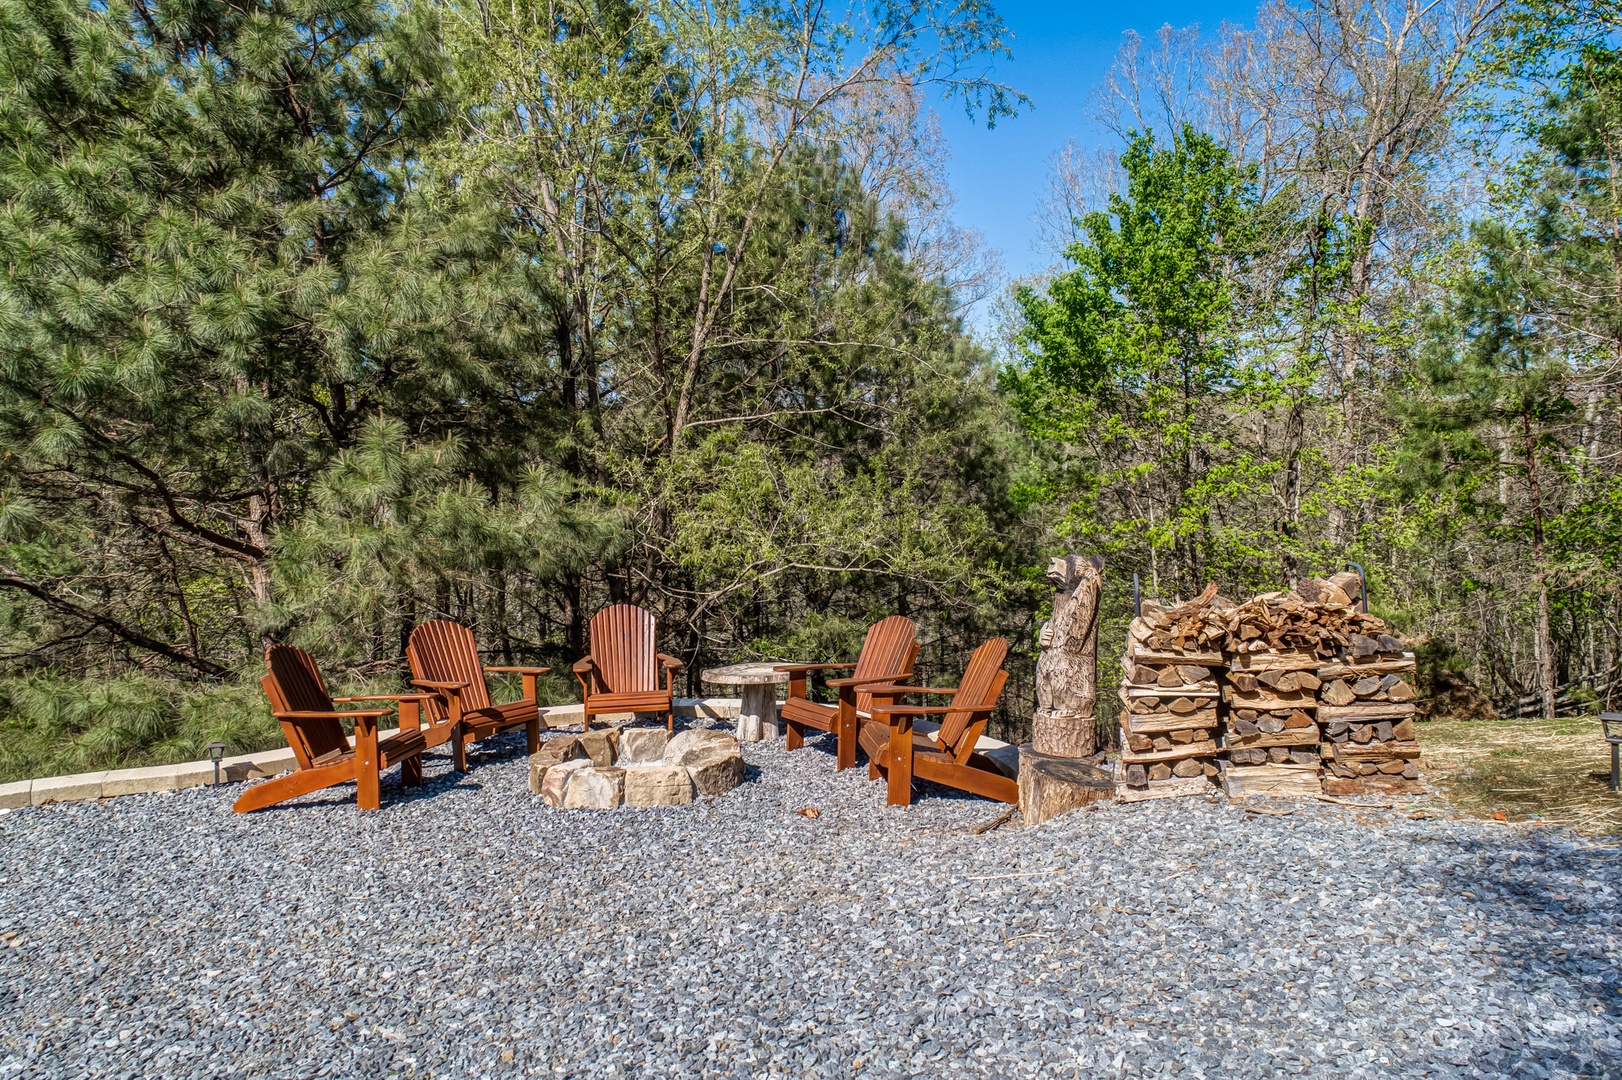 Roast smores, enjoy a cup of coffee, or cozy up under the Georgia Stars next to this outdoor open air fire pit